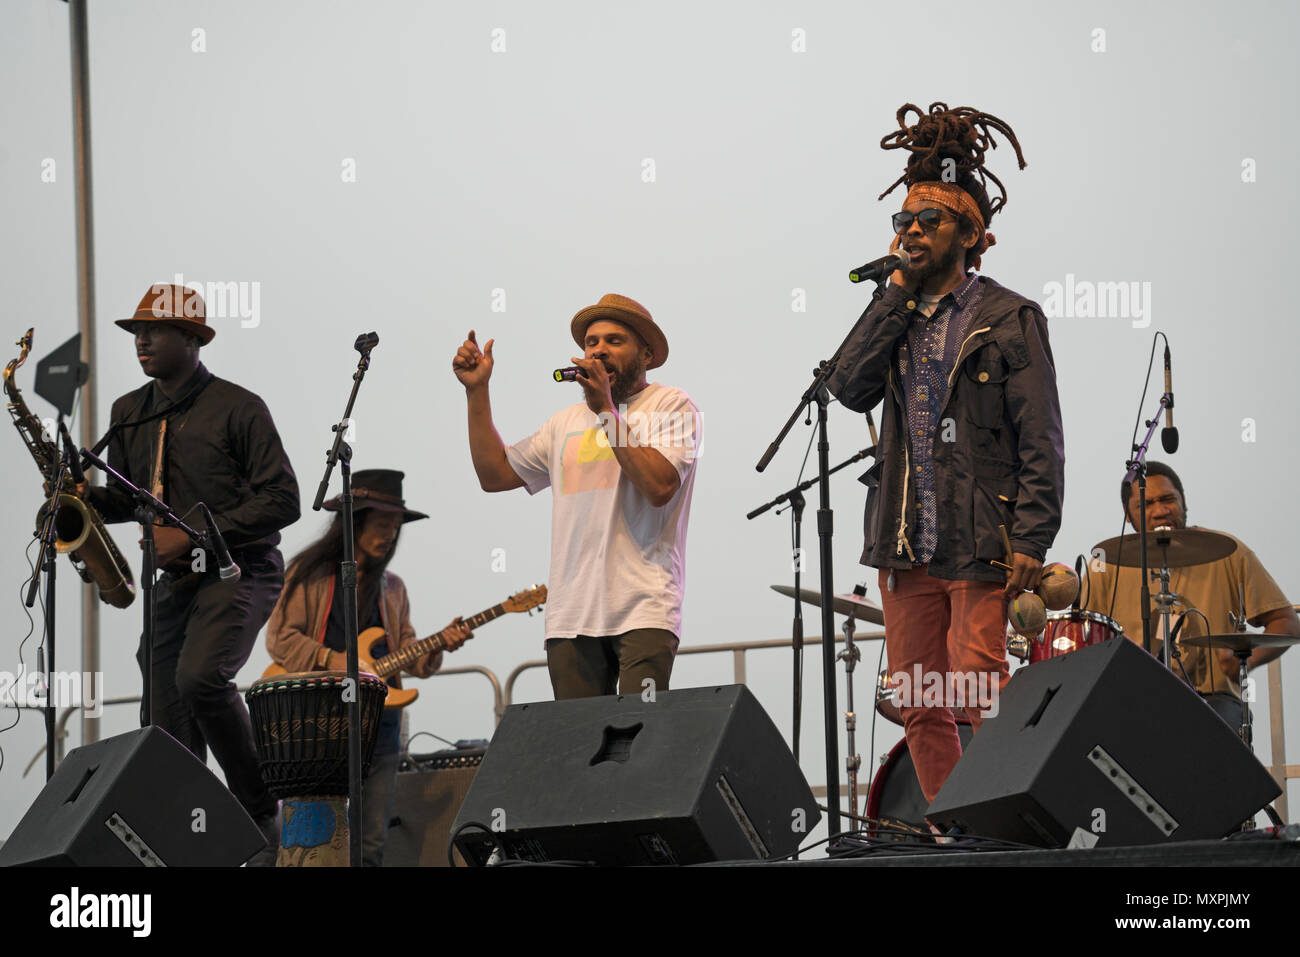 Brown Rice Family, a band from Brooklyn, played in Rockefeller Park at the Battery Park City 50th anniversary celebration on May 31, 2018. Stock Photo